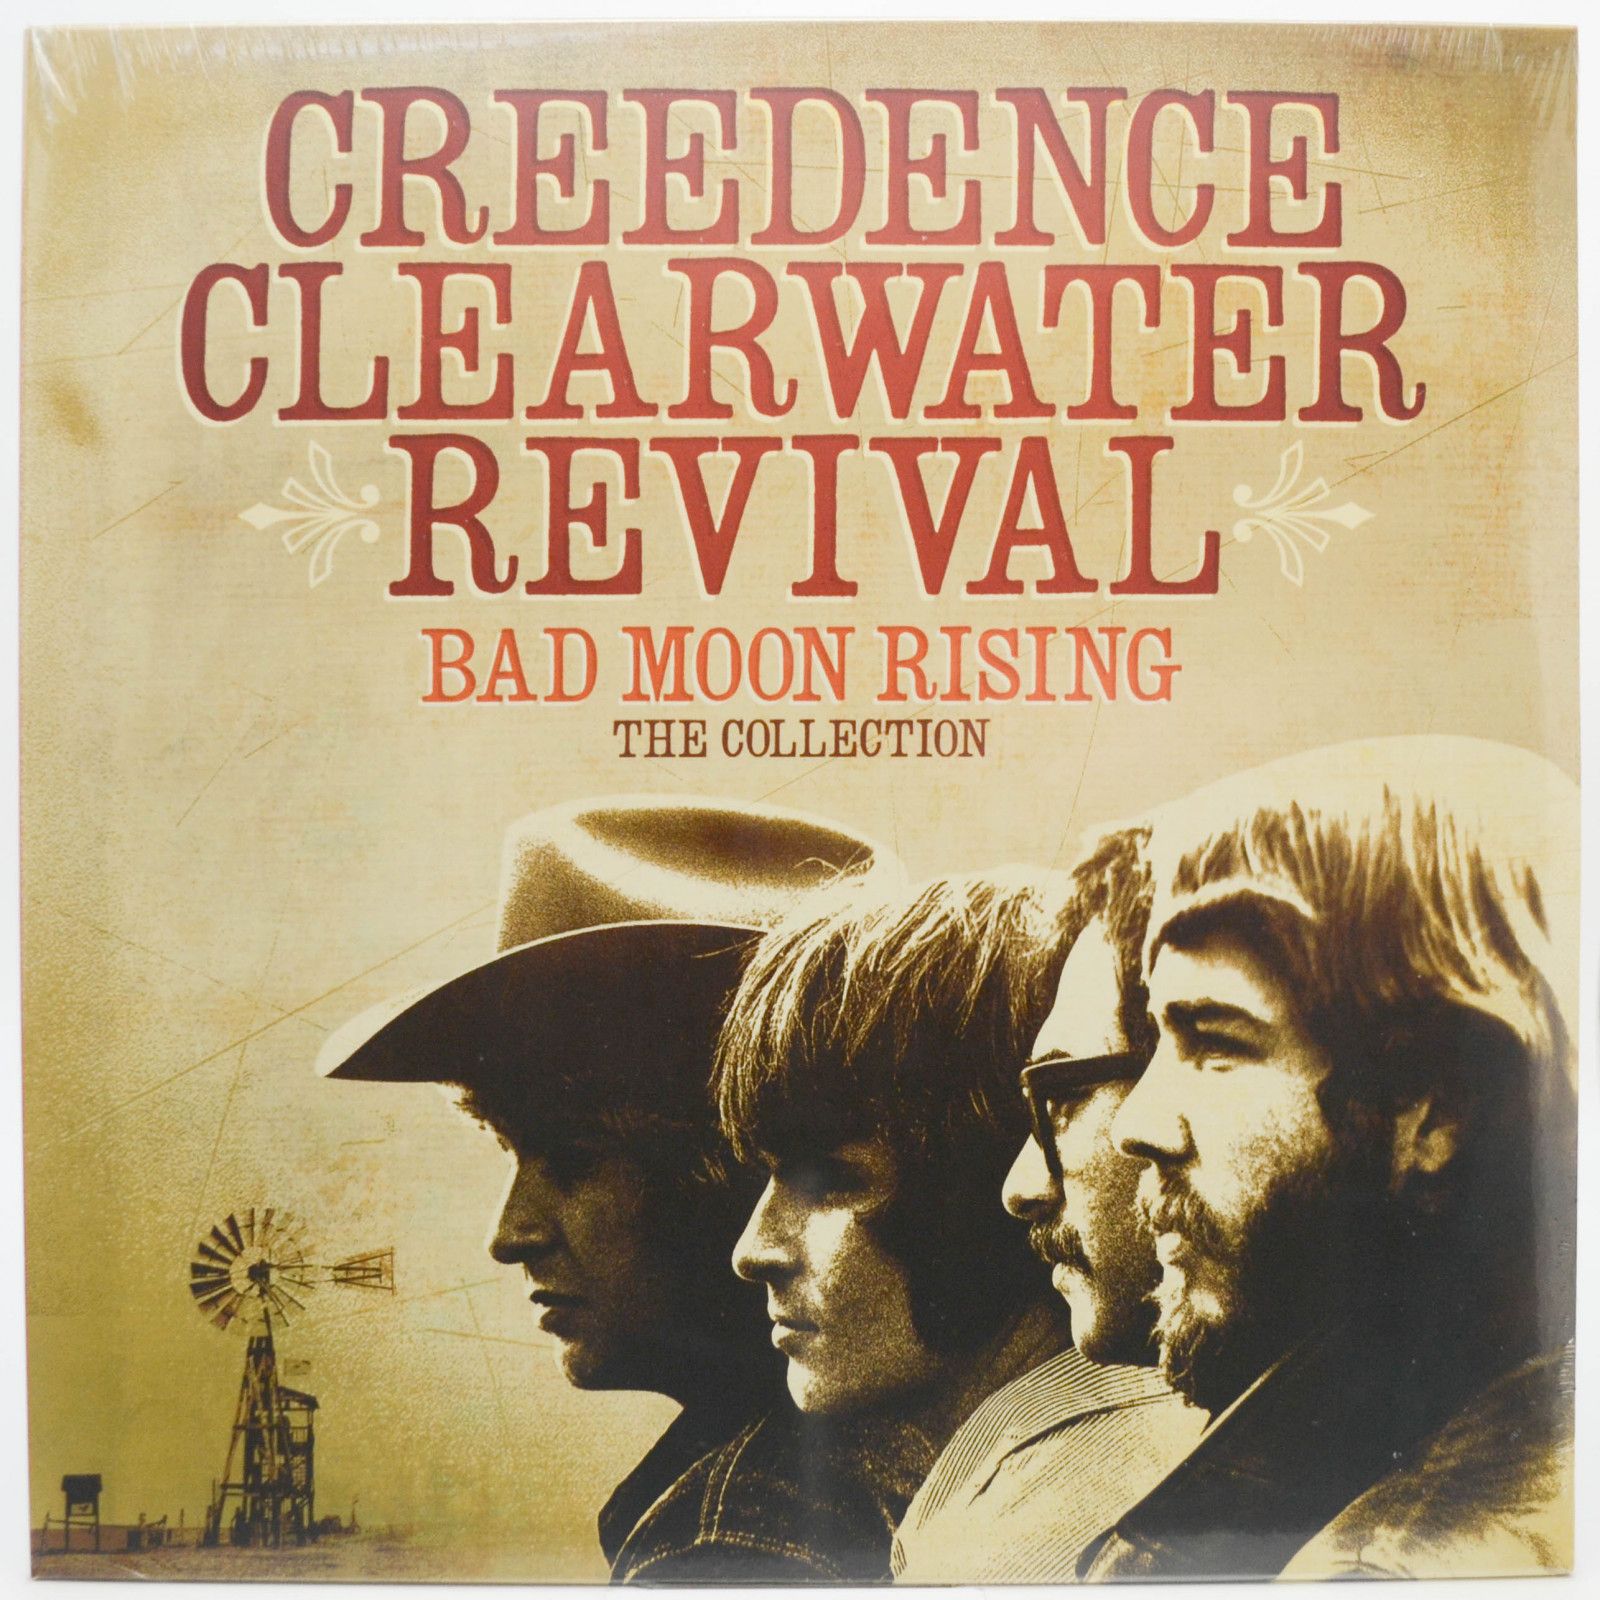 Creedence Clearwater Revival — Bad Moon Rising - The Collection, 2013